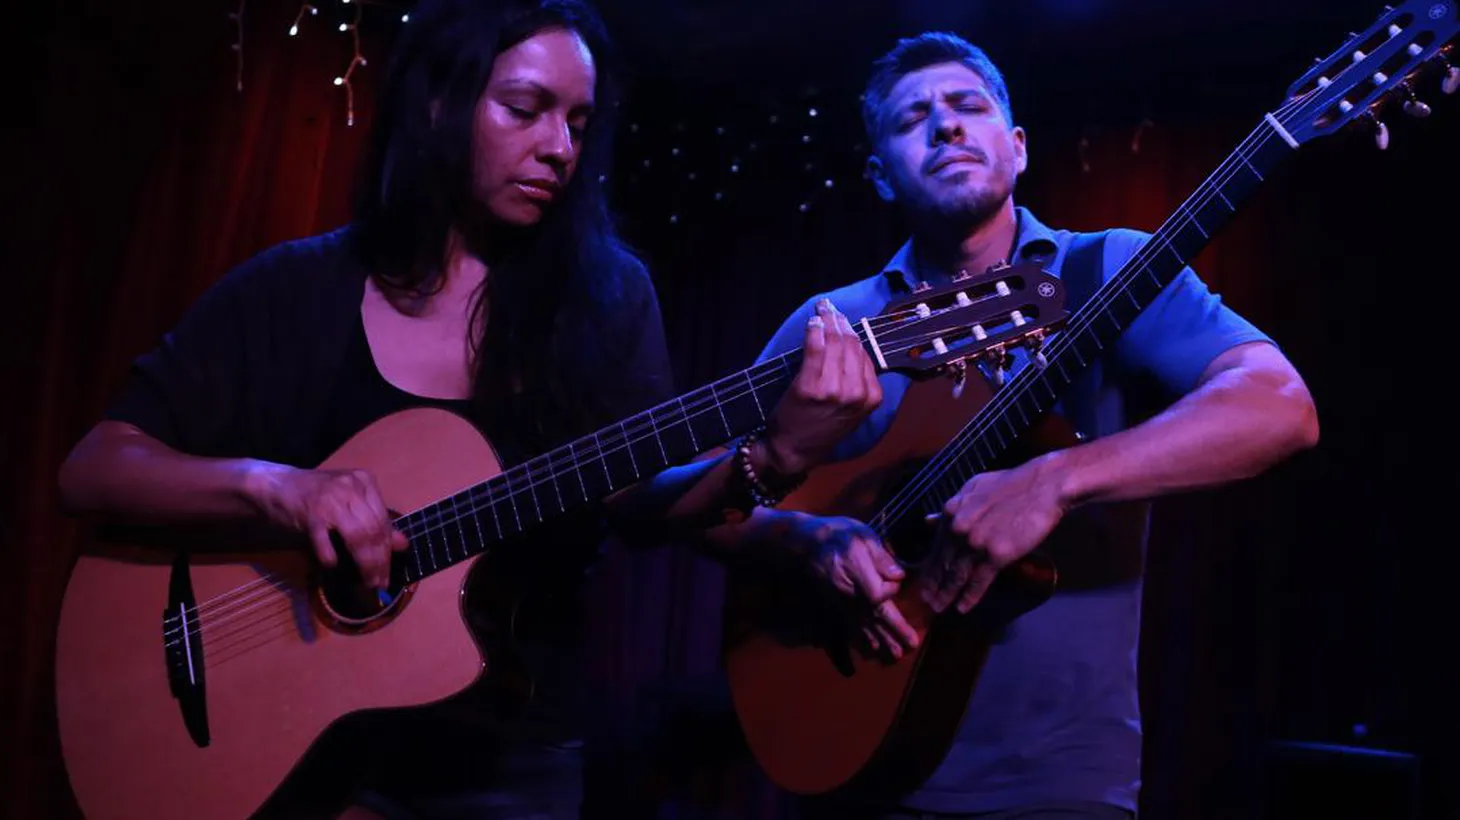 Master guitarists Rodrigo y Gabriela transform their instruments into percussive vehicles of melody as they perform at KCRW's Apogee Sessions.